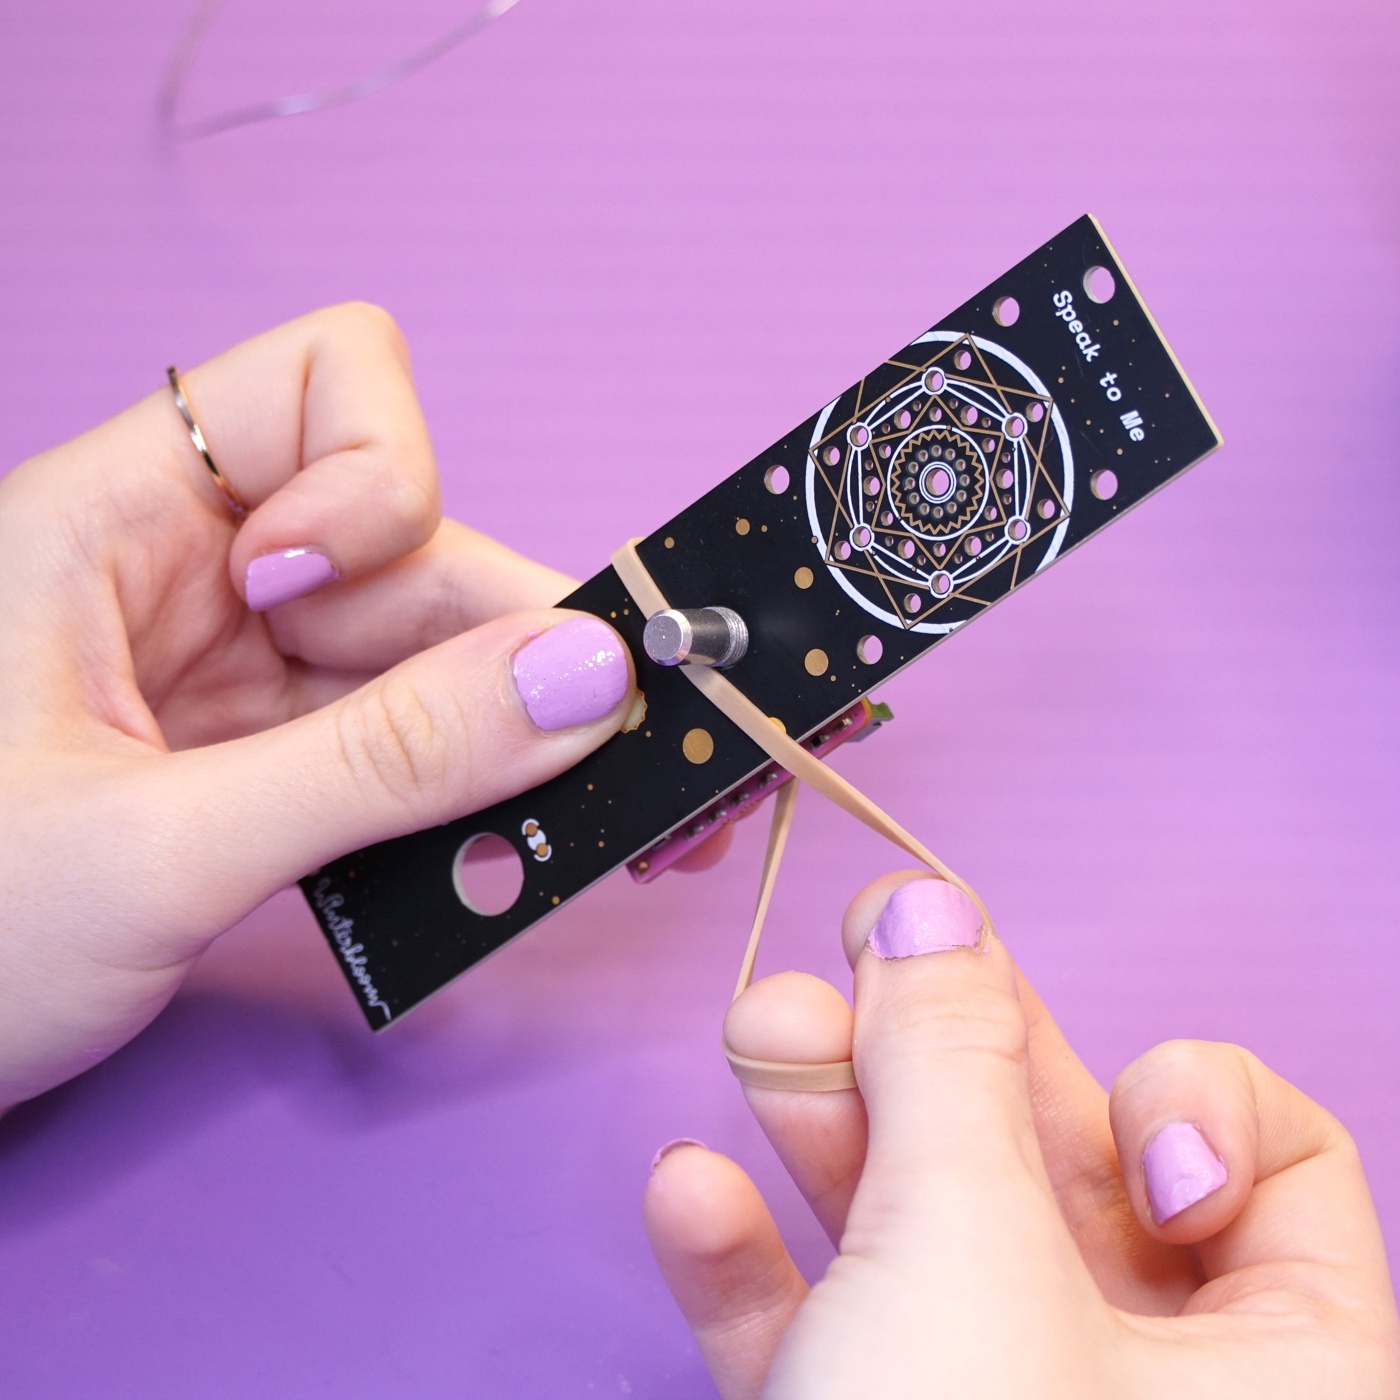 A rubber band being pulled taught across the center of the module